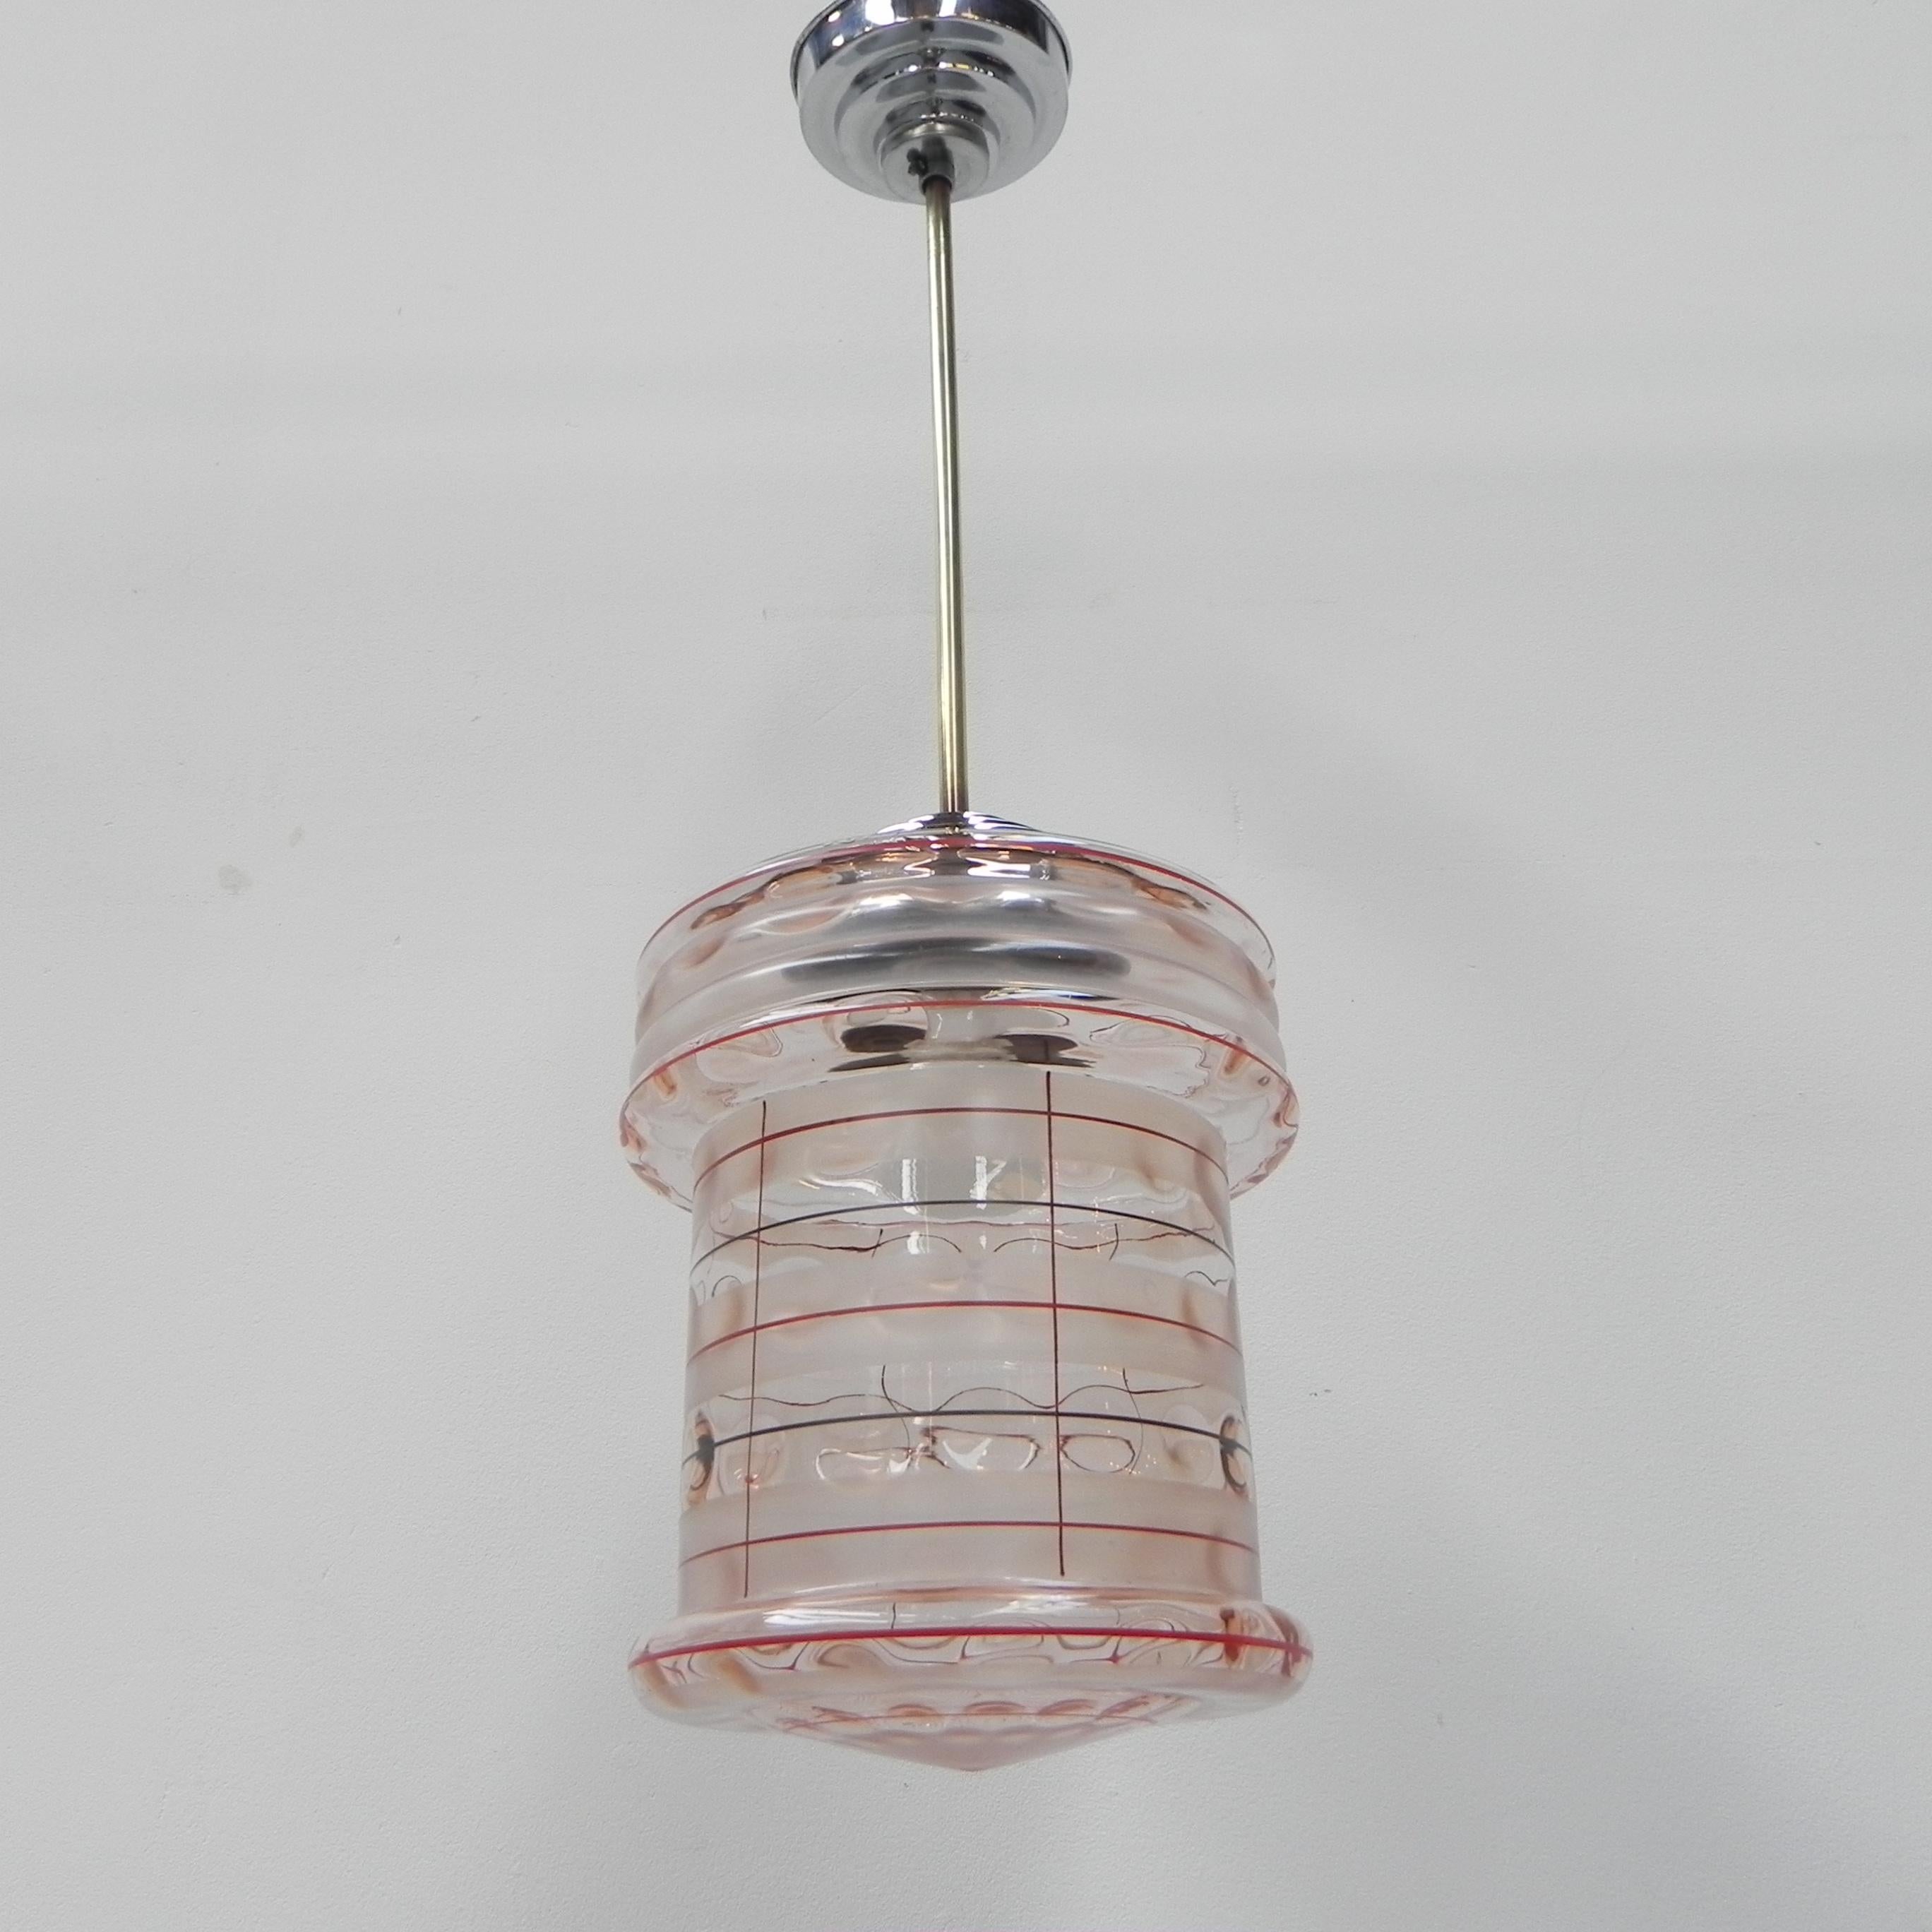 French Art Deco hanging lamp with pink glass shade For Sale